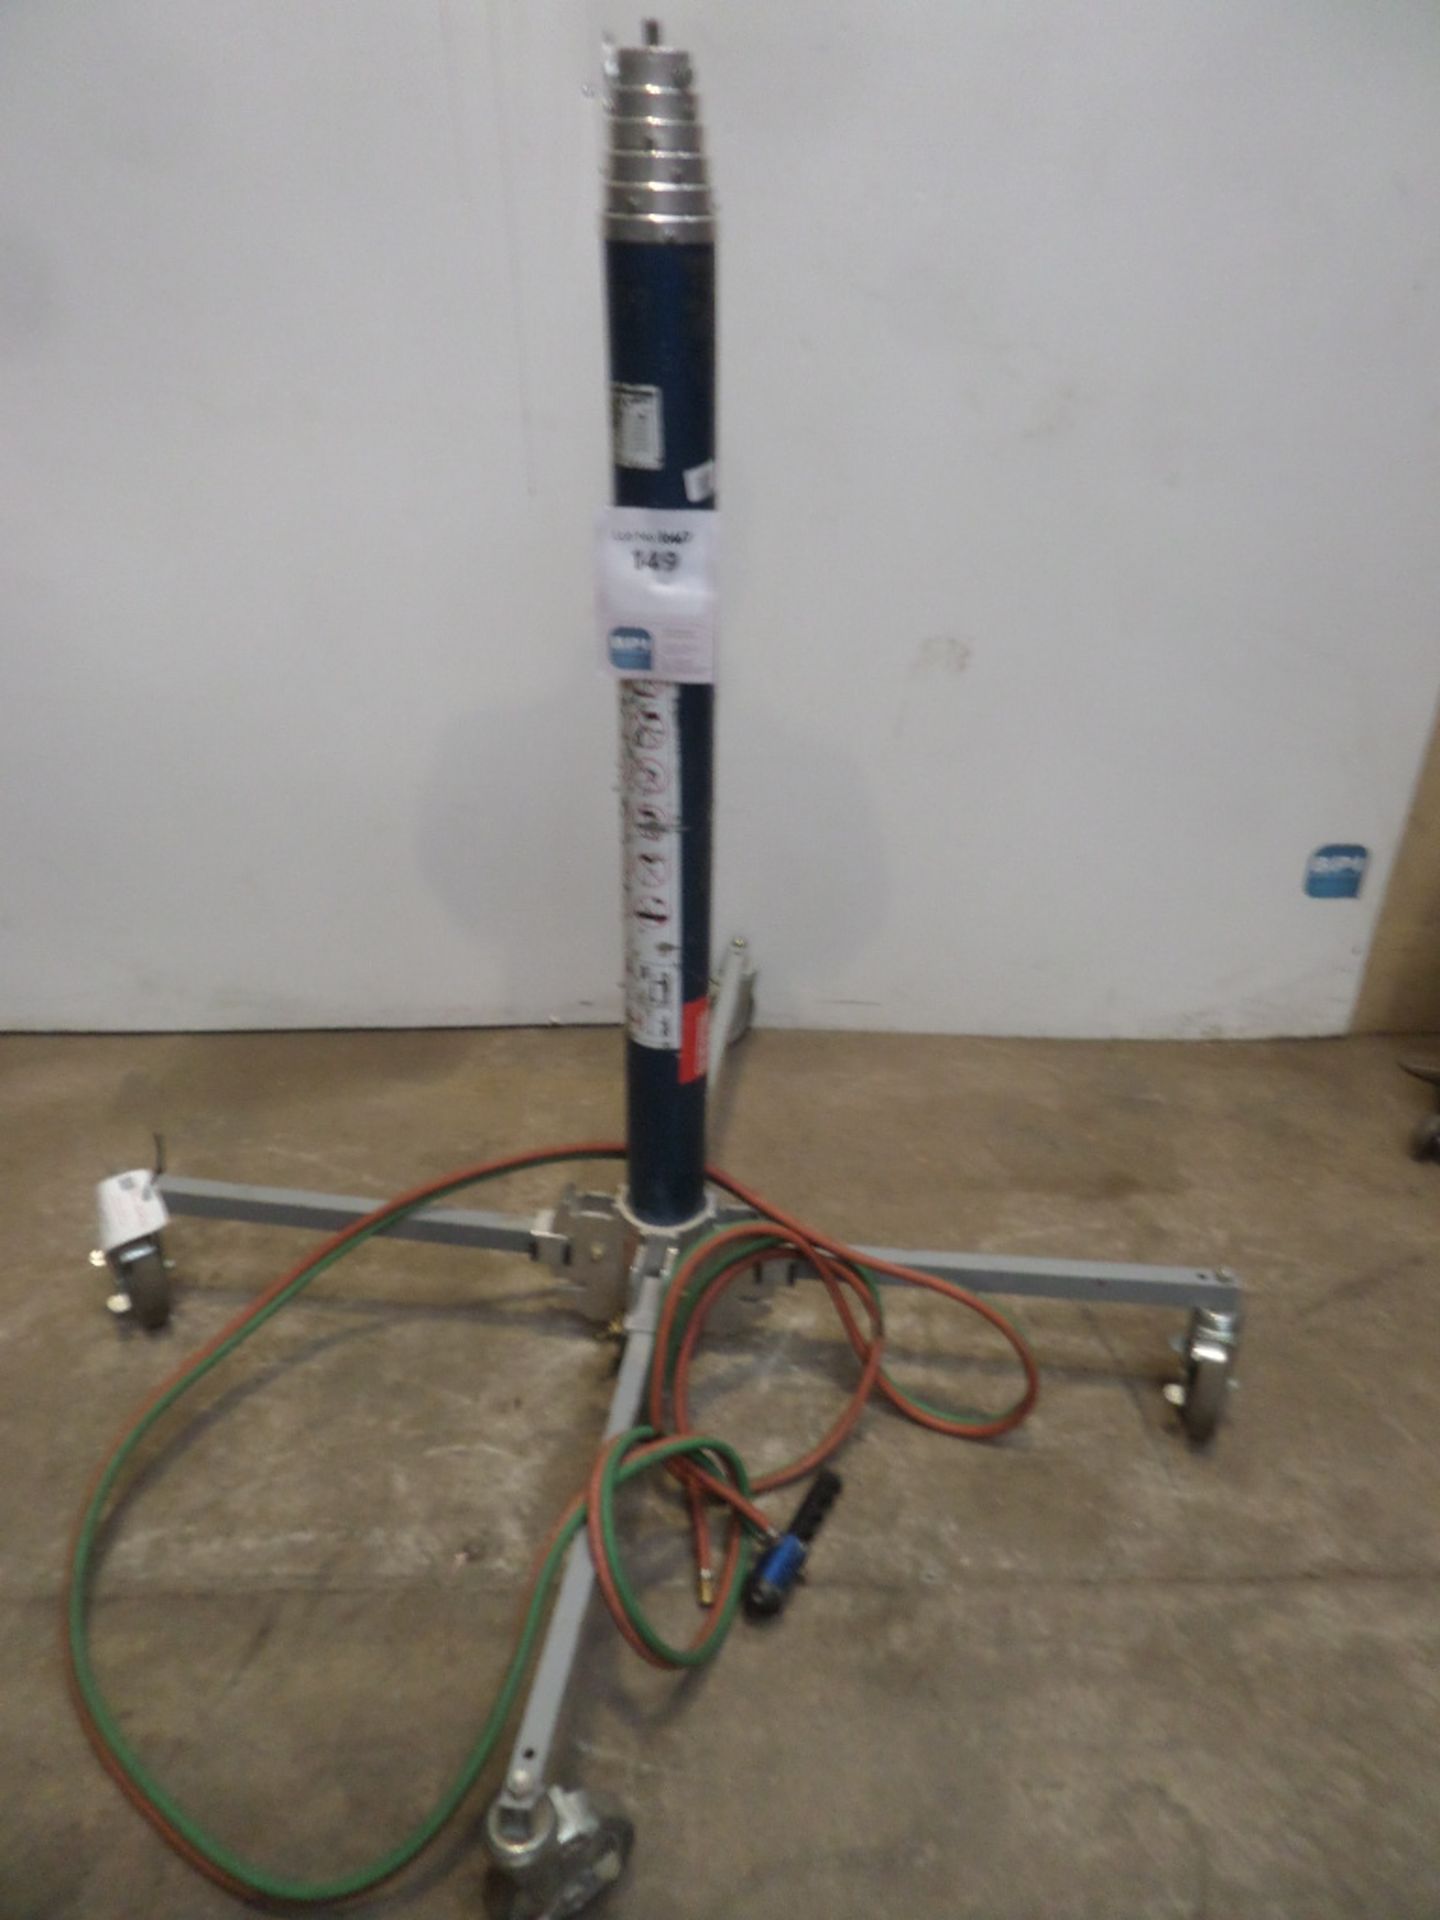 GENIE SUPER HOIST GH5.6 {028078} GAS OPERATED GENIE LIFT Tested with air line and reaches 5.6mtrs -